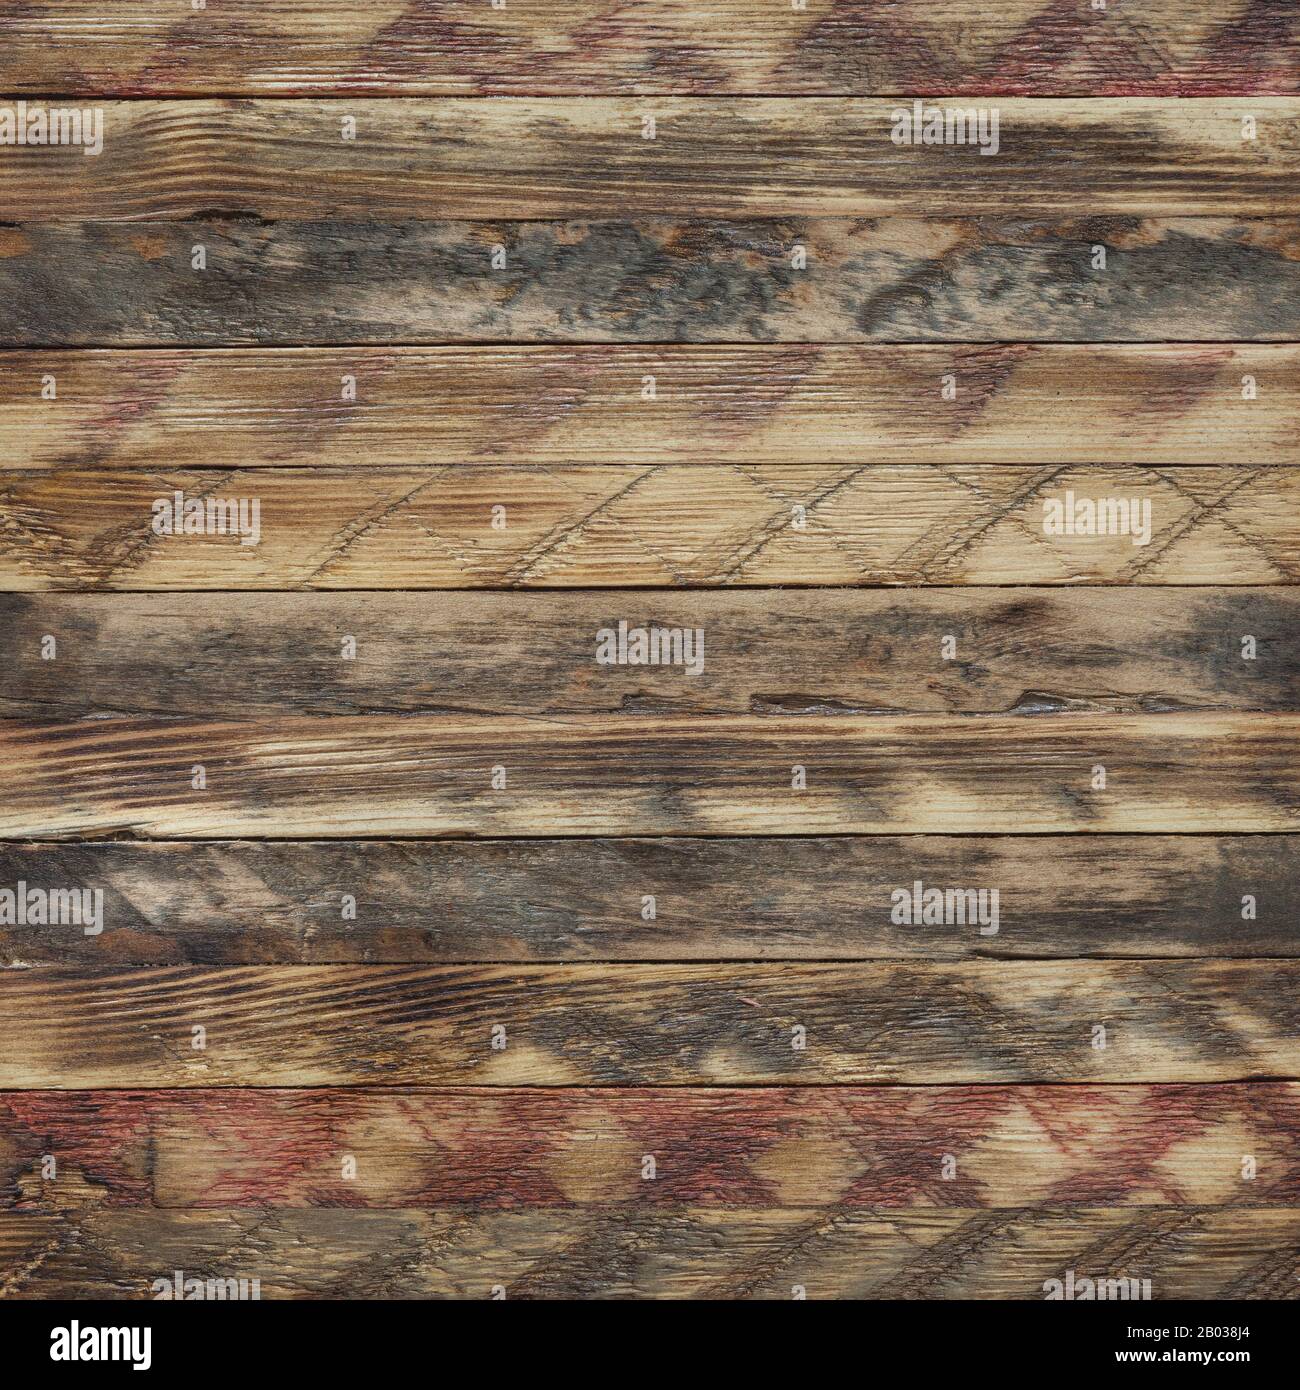 Wooden texture, empty wood background Stock Photo